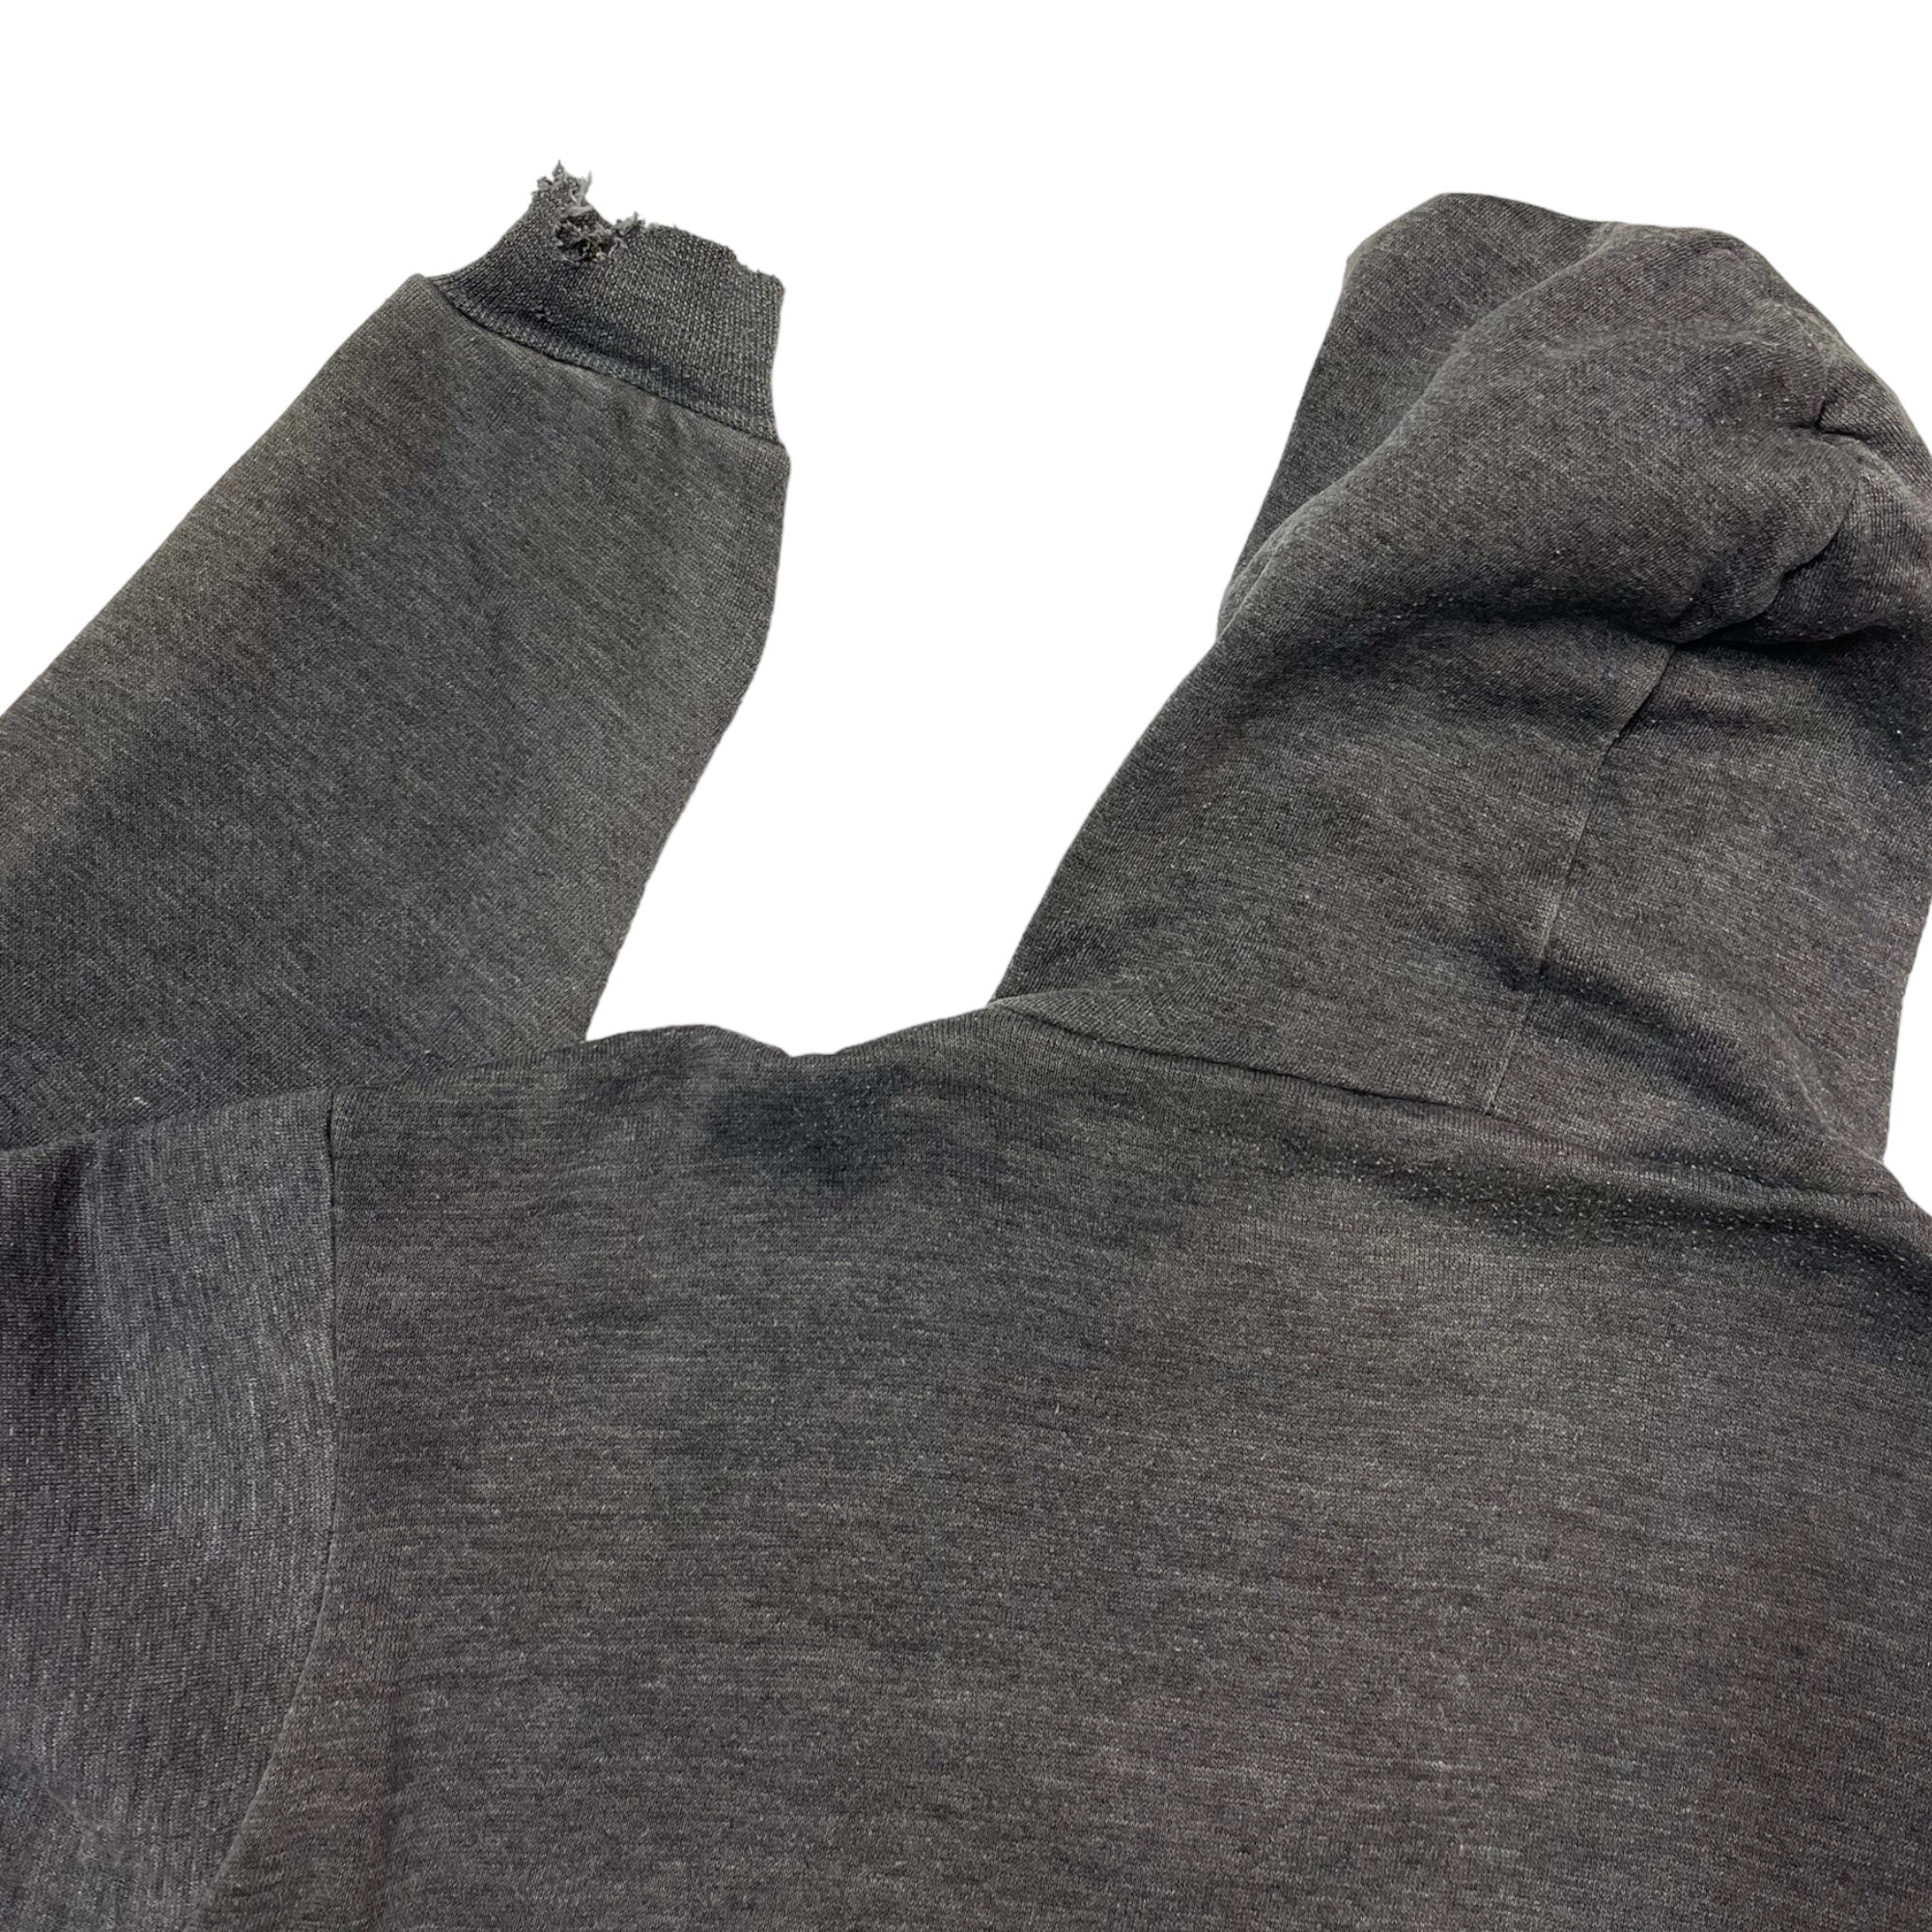 Early 1960s Waffle/Thermal Lined Springfoot Brand Hooded Sweatshirt - Faded Heather Black/Charcoal - M/L